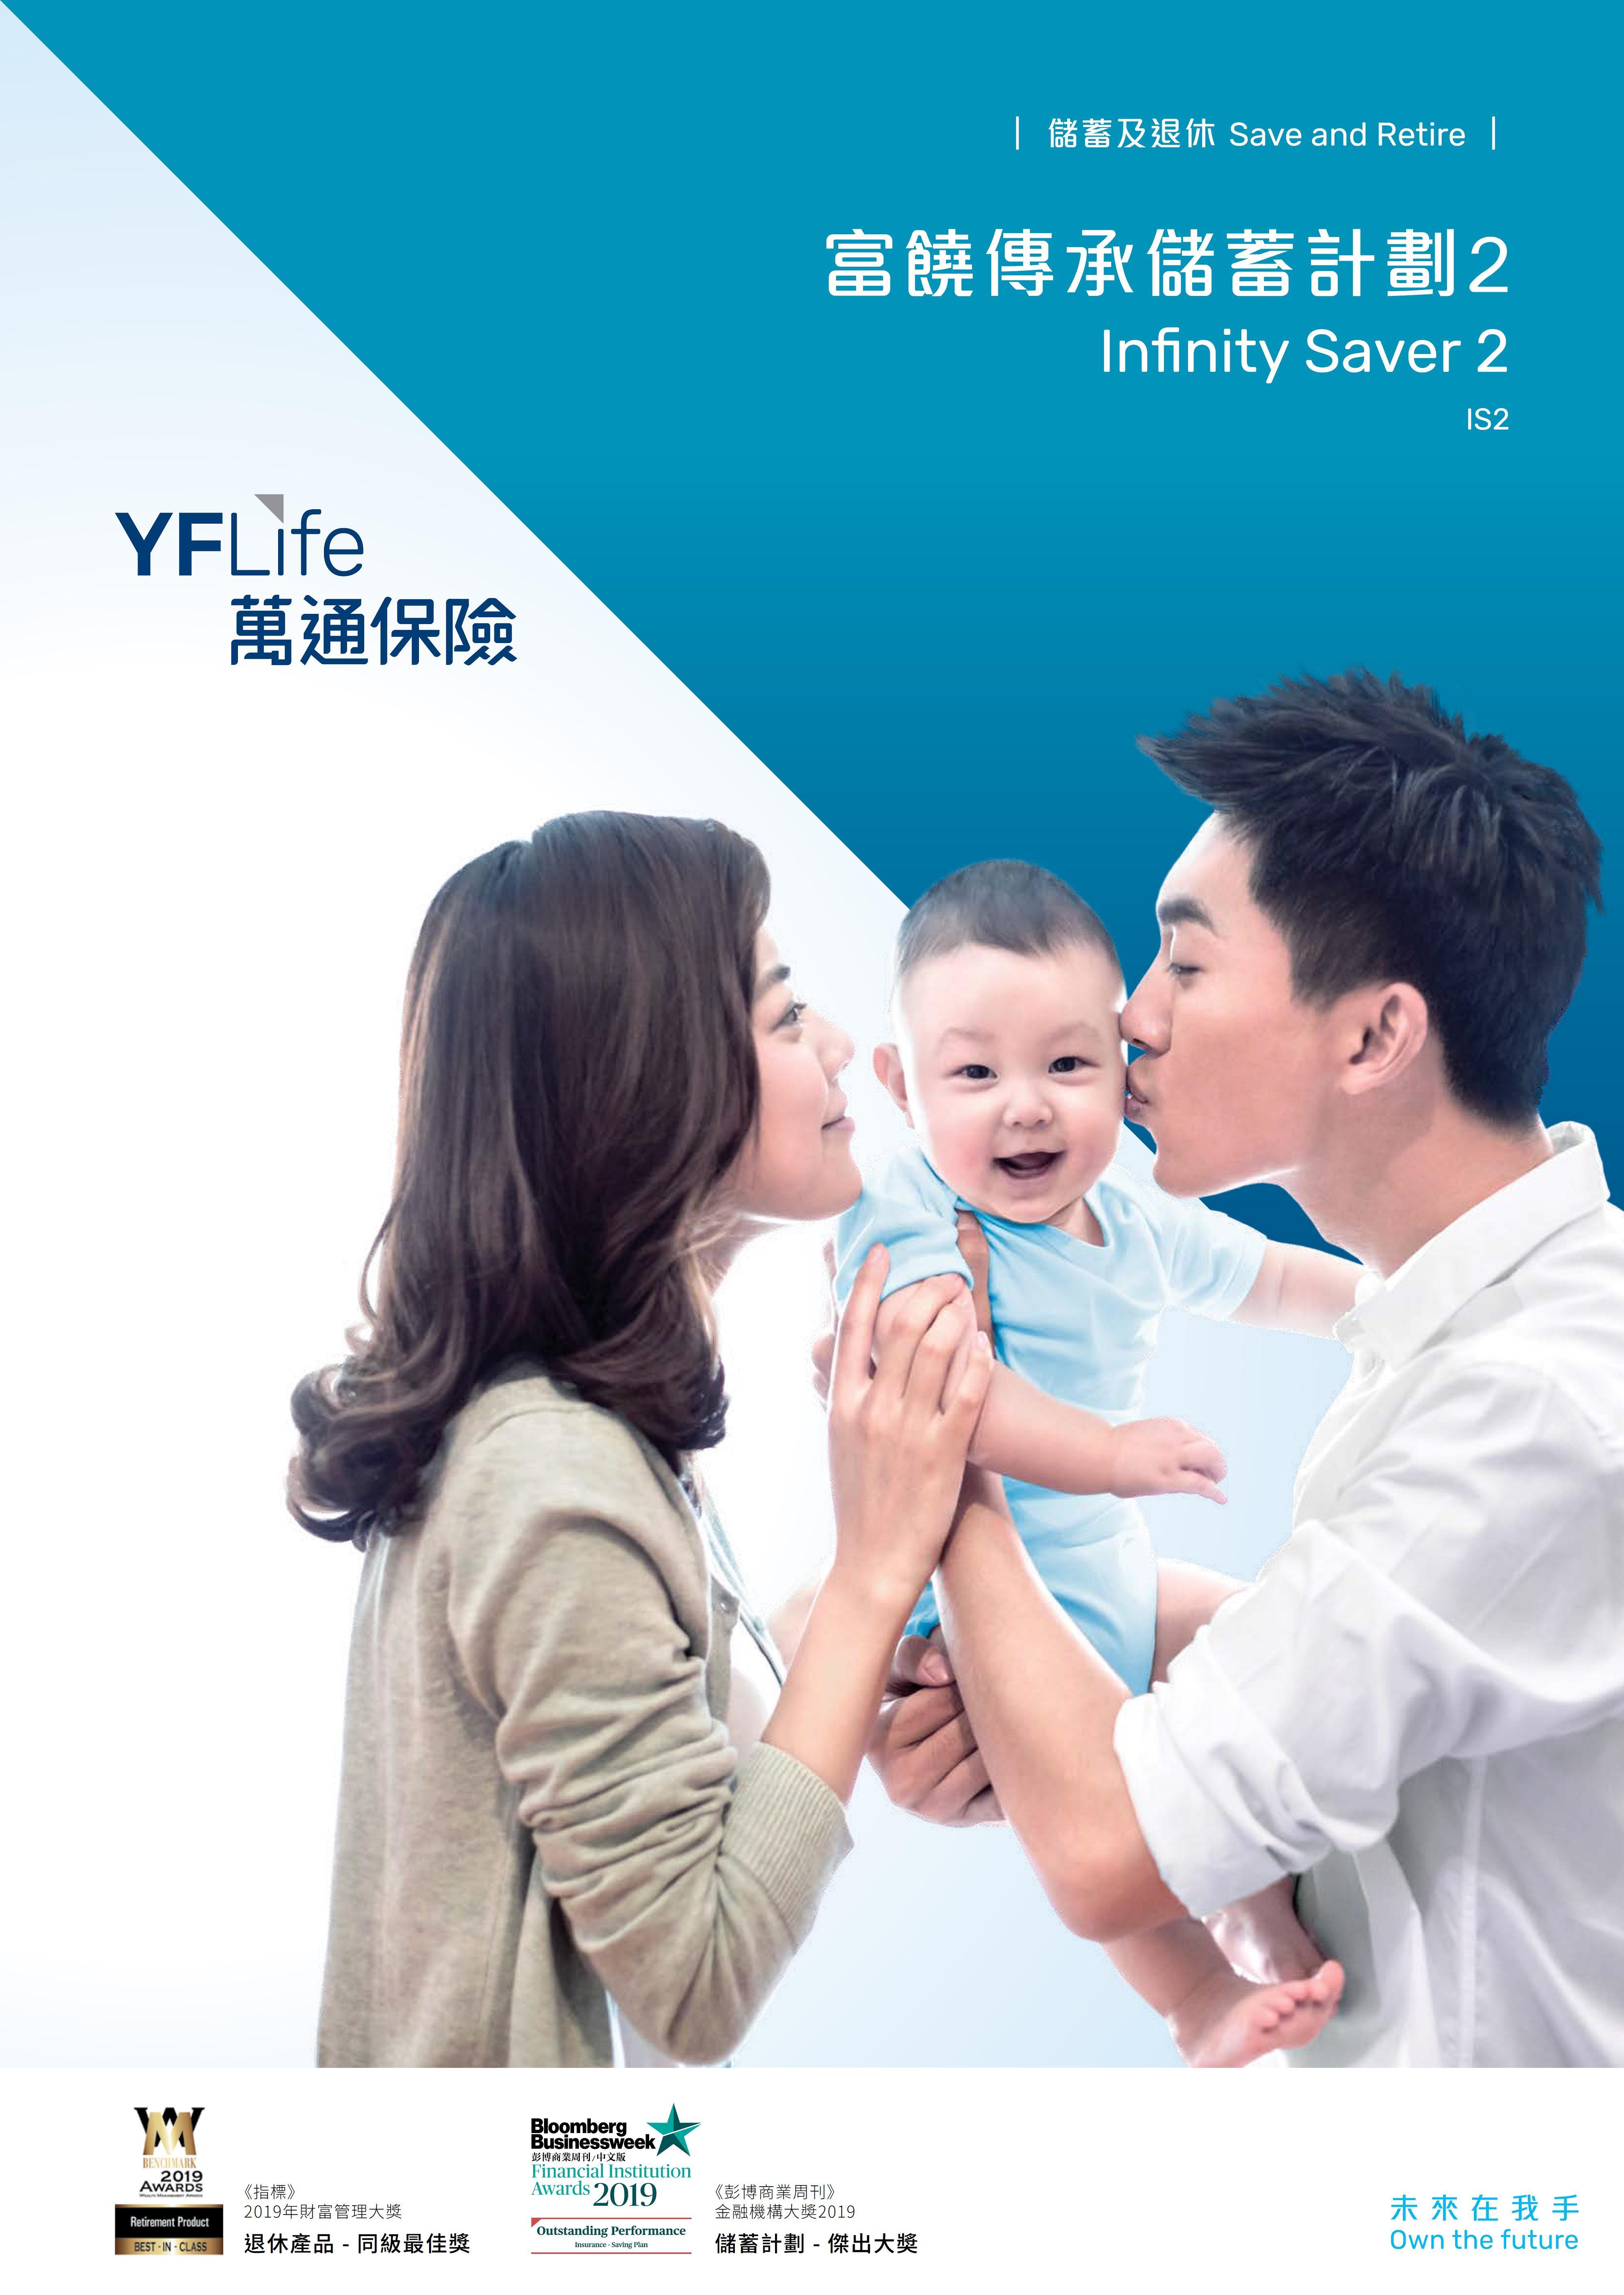 YF Life launches a brand new mid-to-long-term participating insurance plan - Infinity Saver 2.  